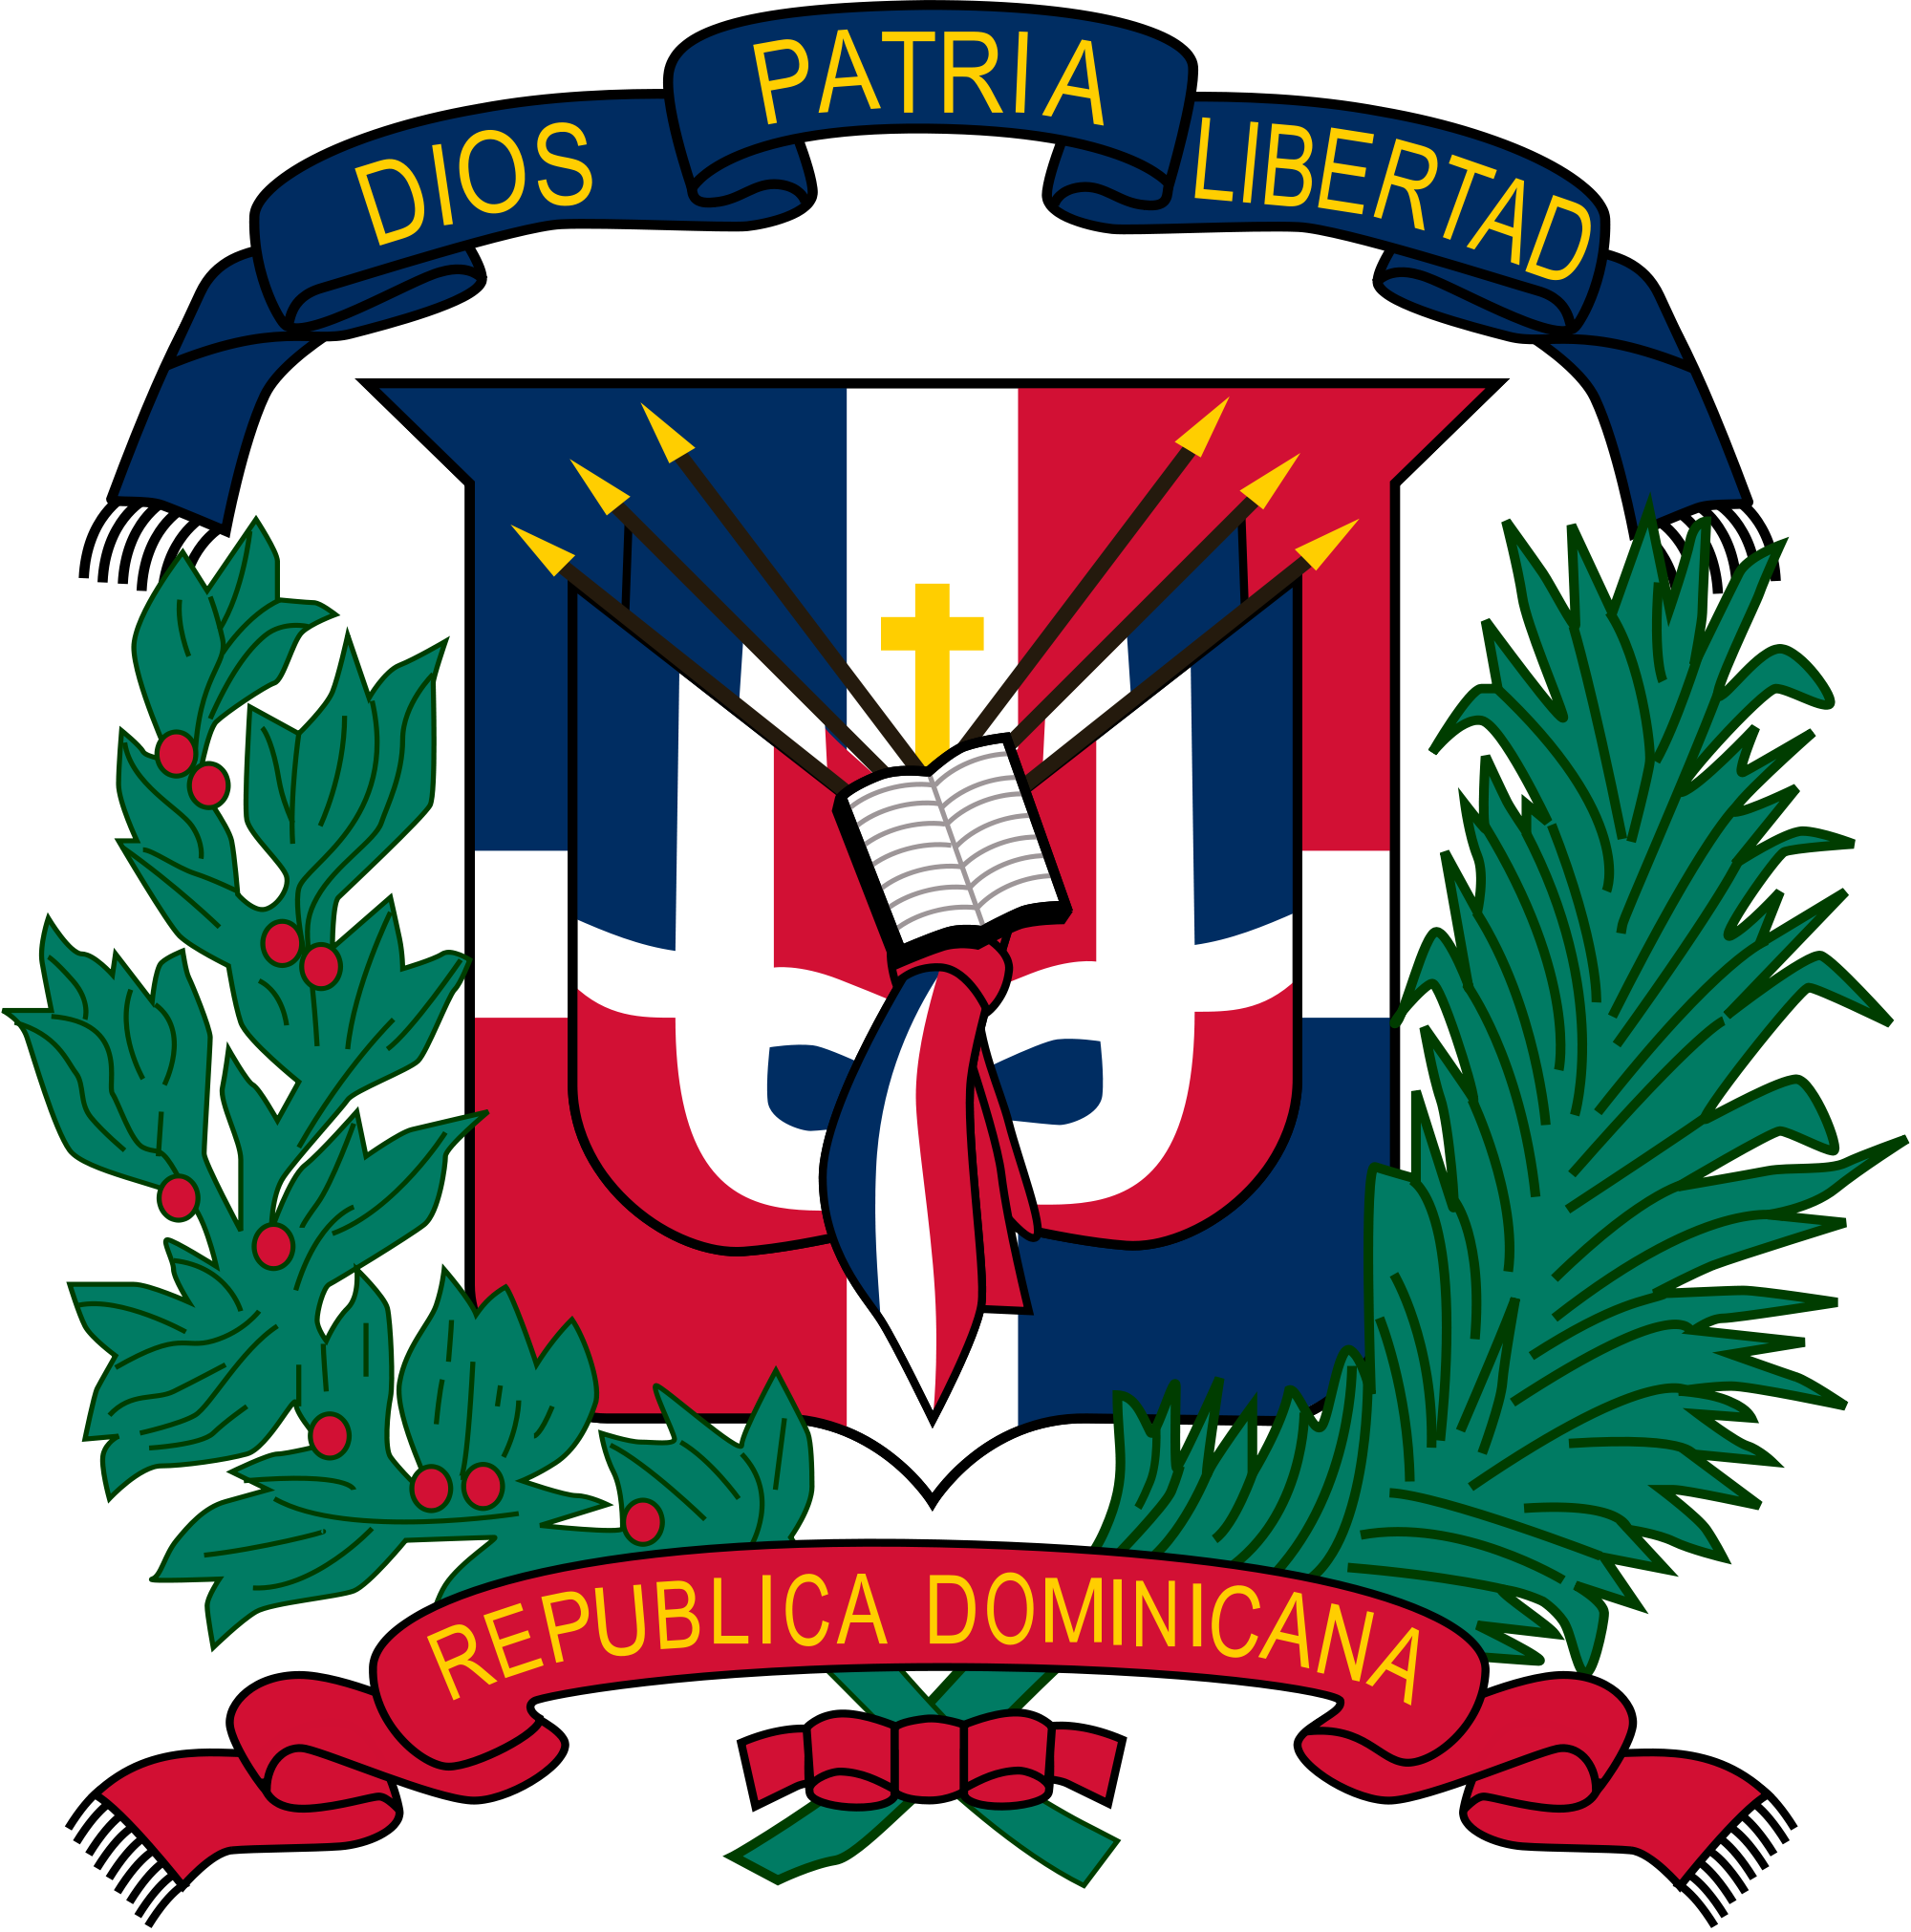 Coat of Arms of Dominican Republic